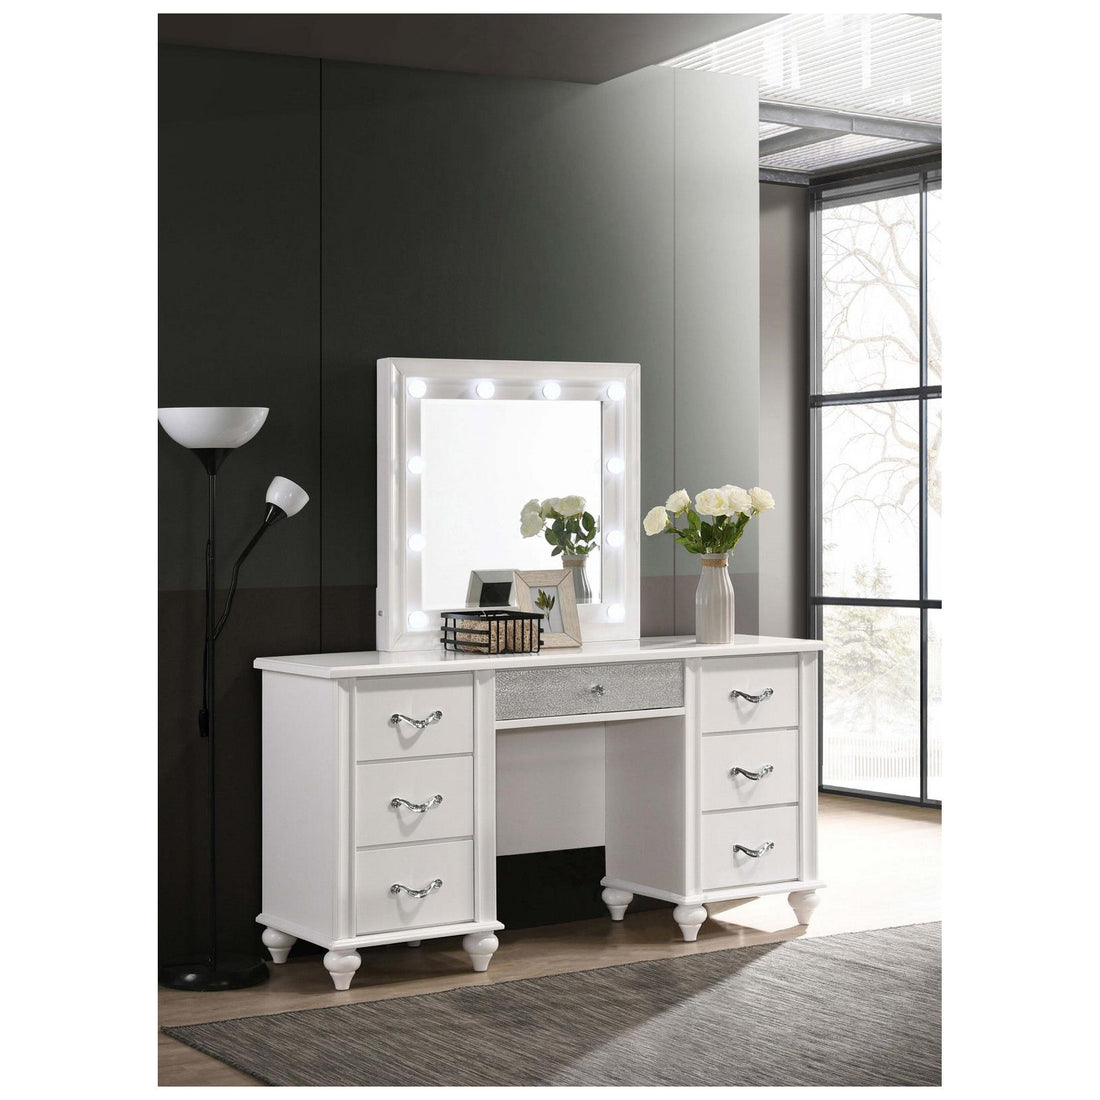 Barzini 7-drawer Vanity Desk with Lighted Mirror White 205897